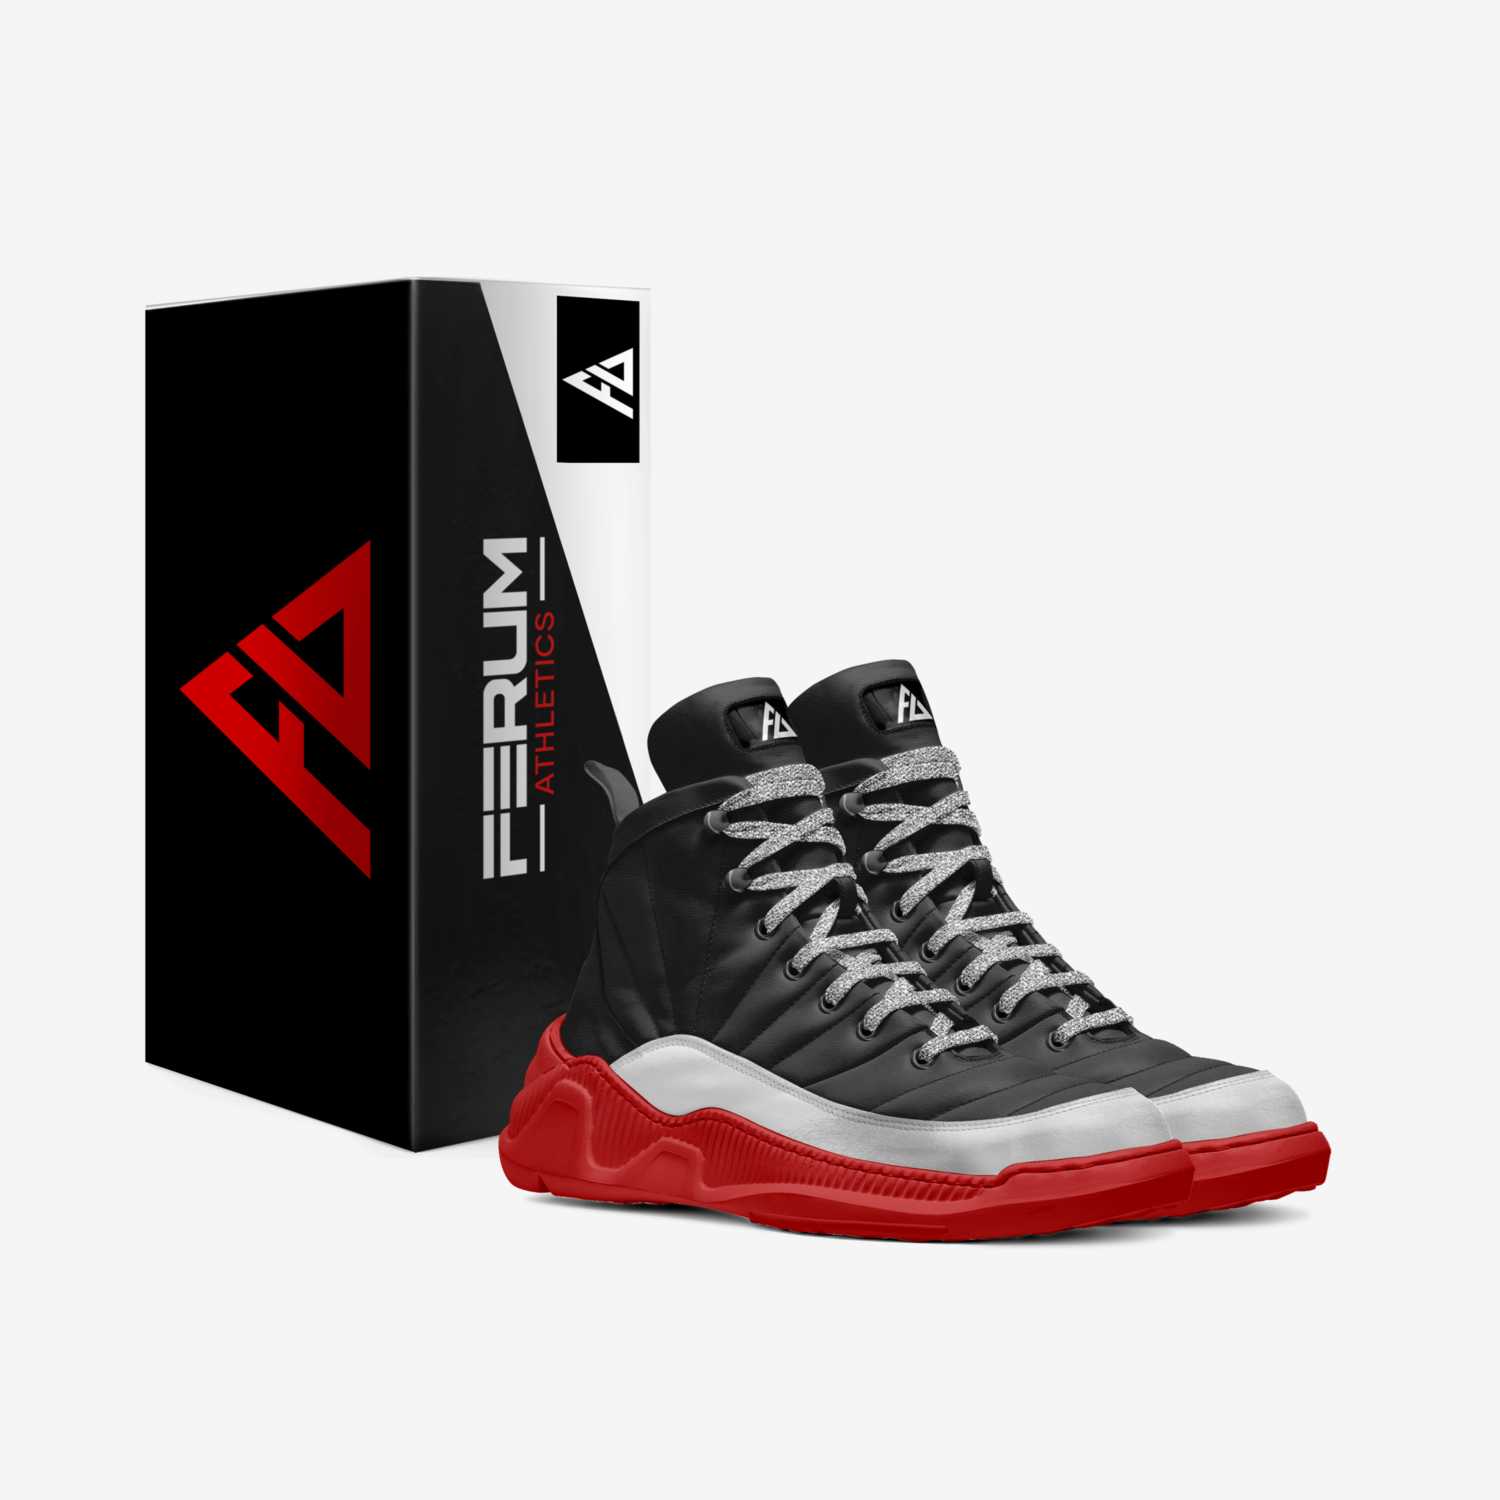 FA POST FACTO 1 custom made in Italy shoes by Ferum Athletics | Box view